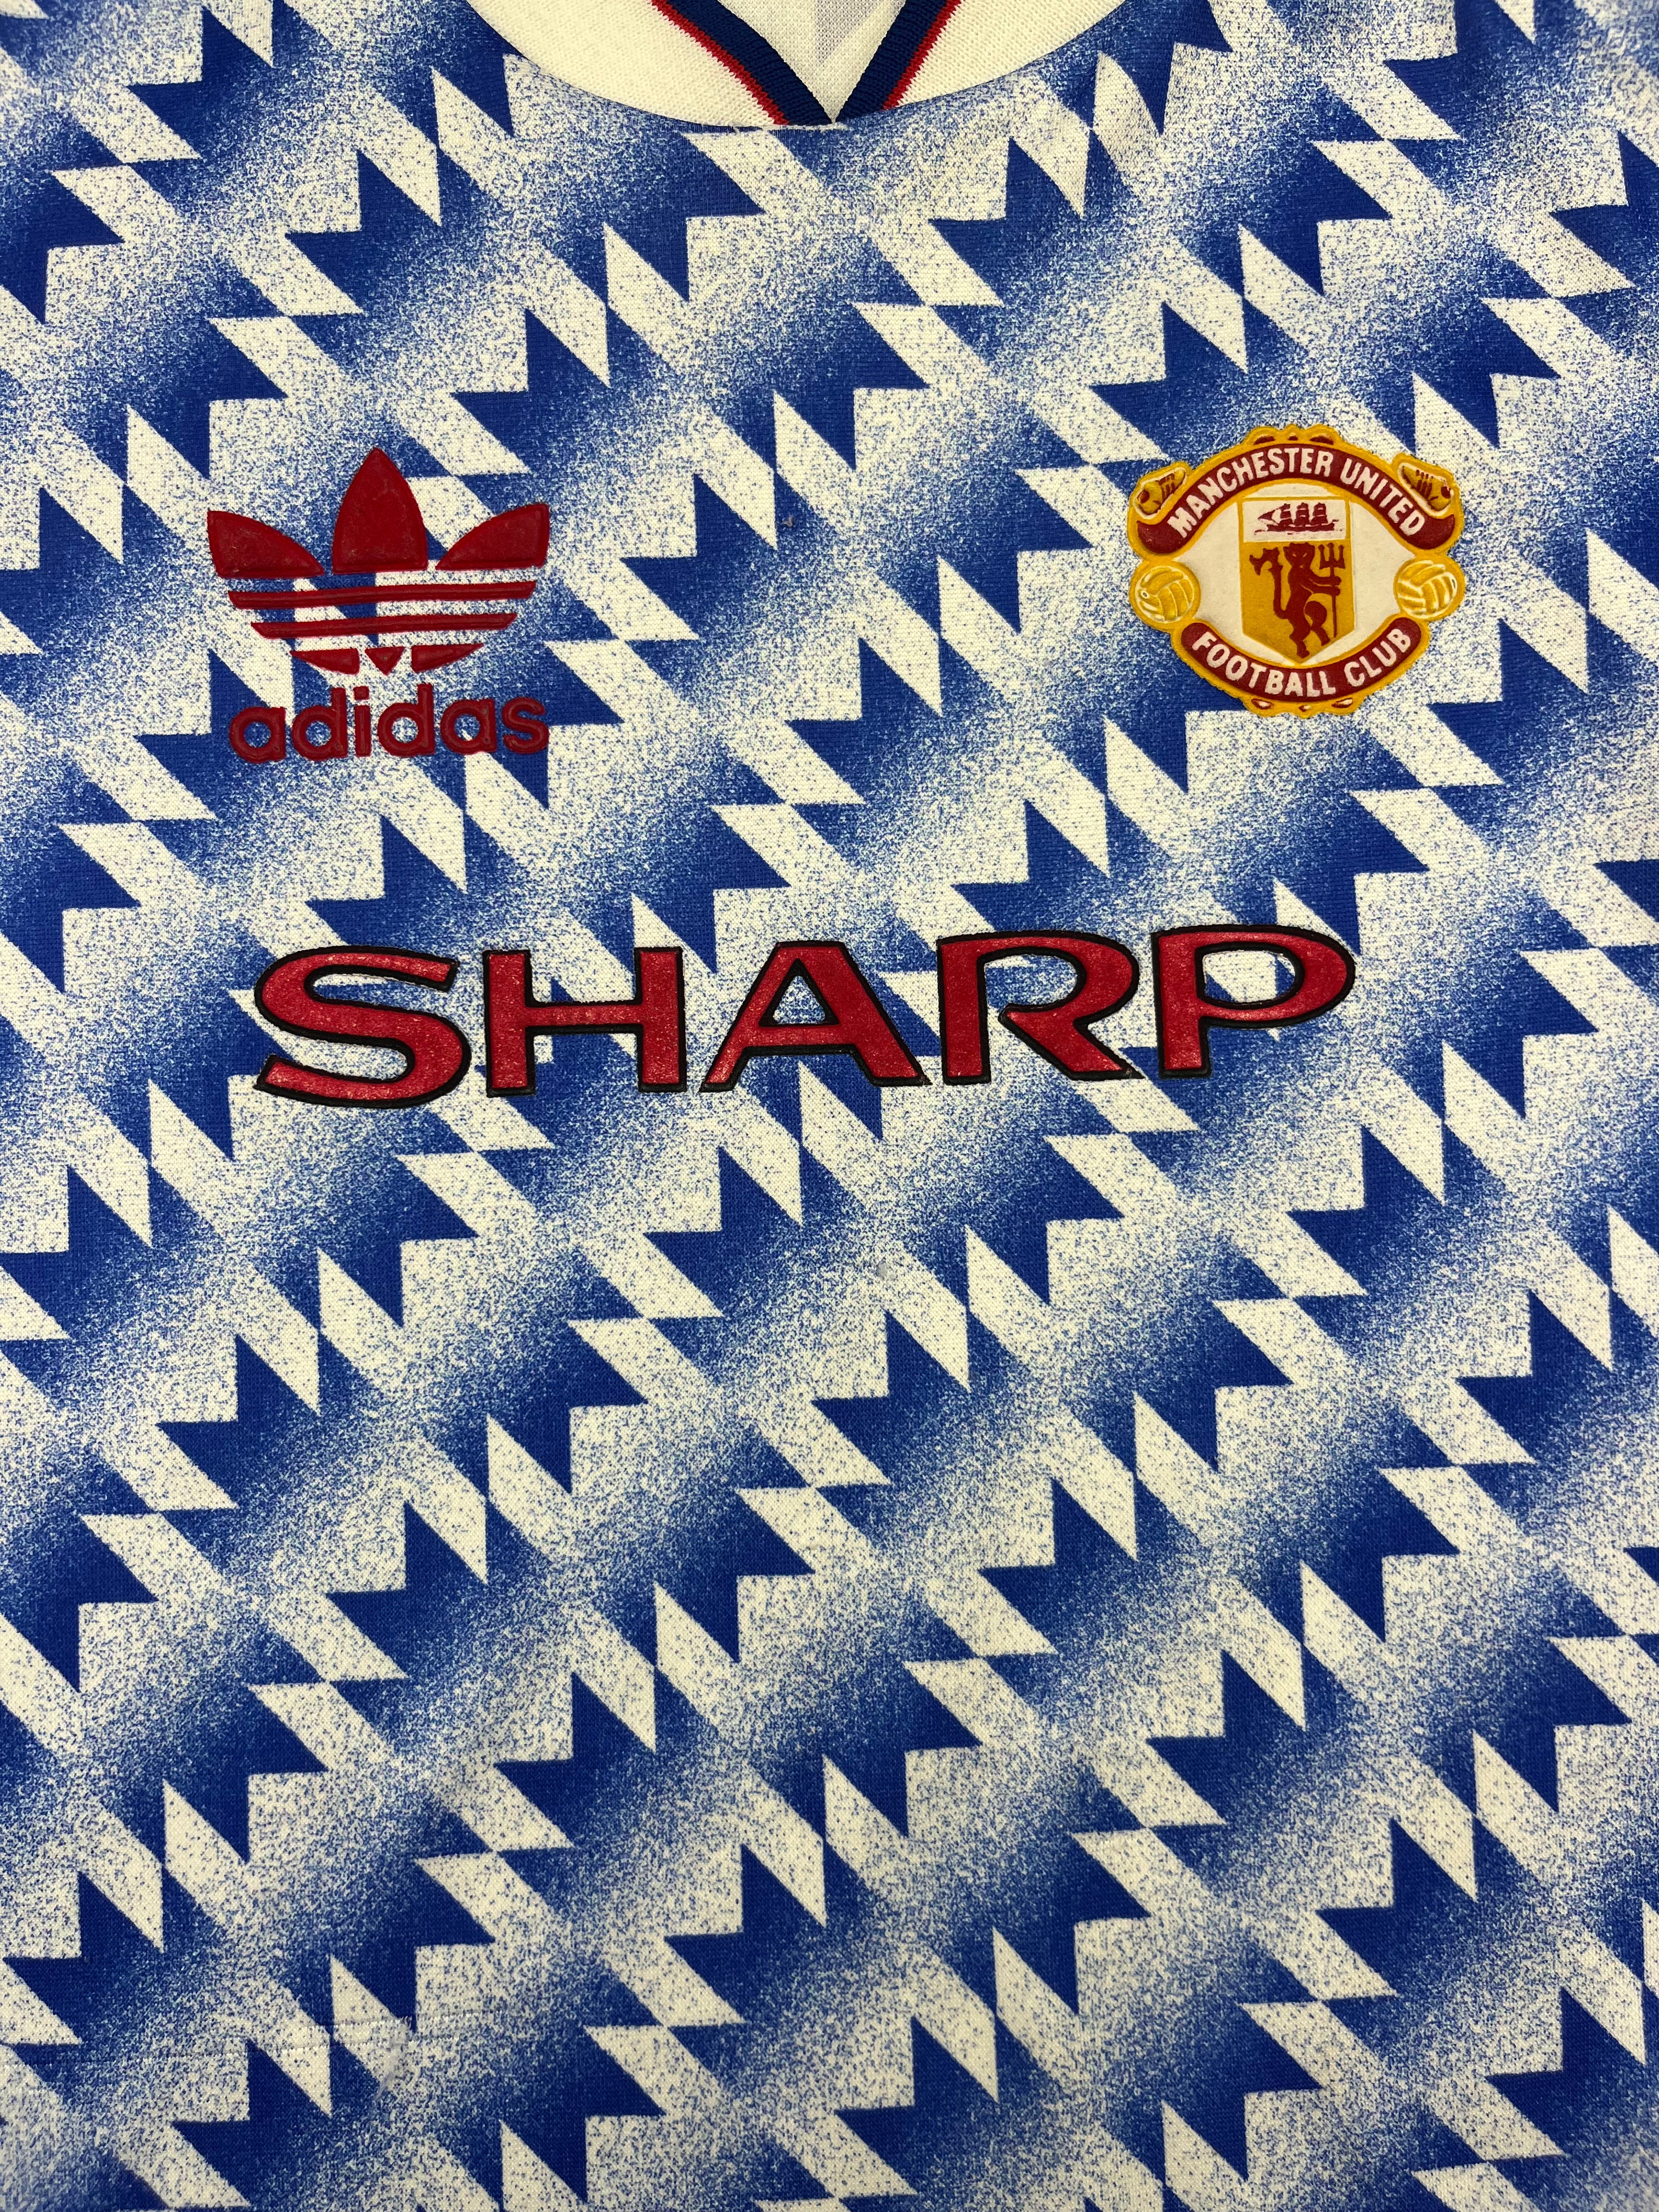 1990/92 Manchester United Away Shirt (Y) 9/10